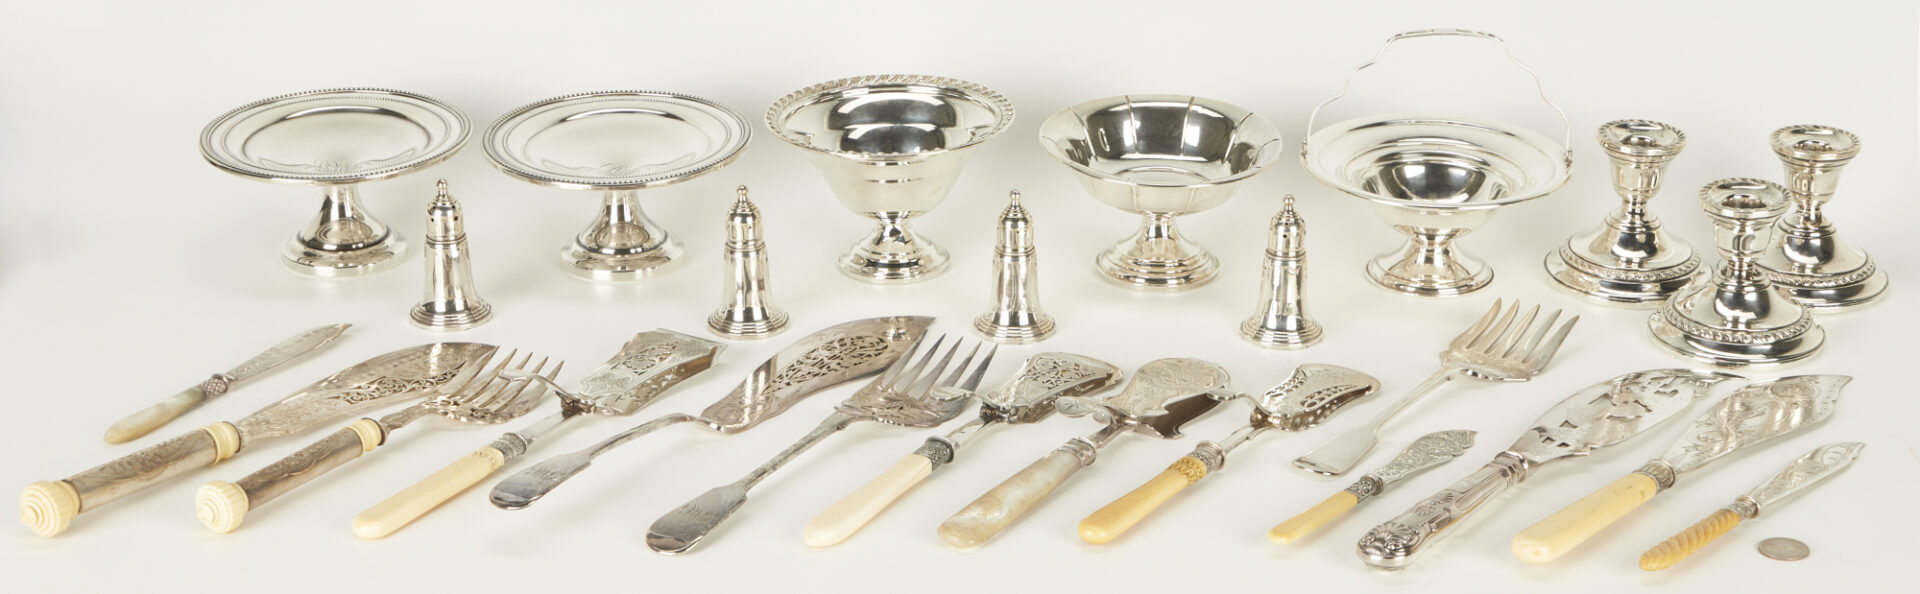 Lot 1112: Assorted Weighted Sterling & Silverplate Serving Items, 26 total